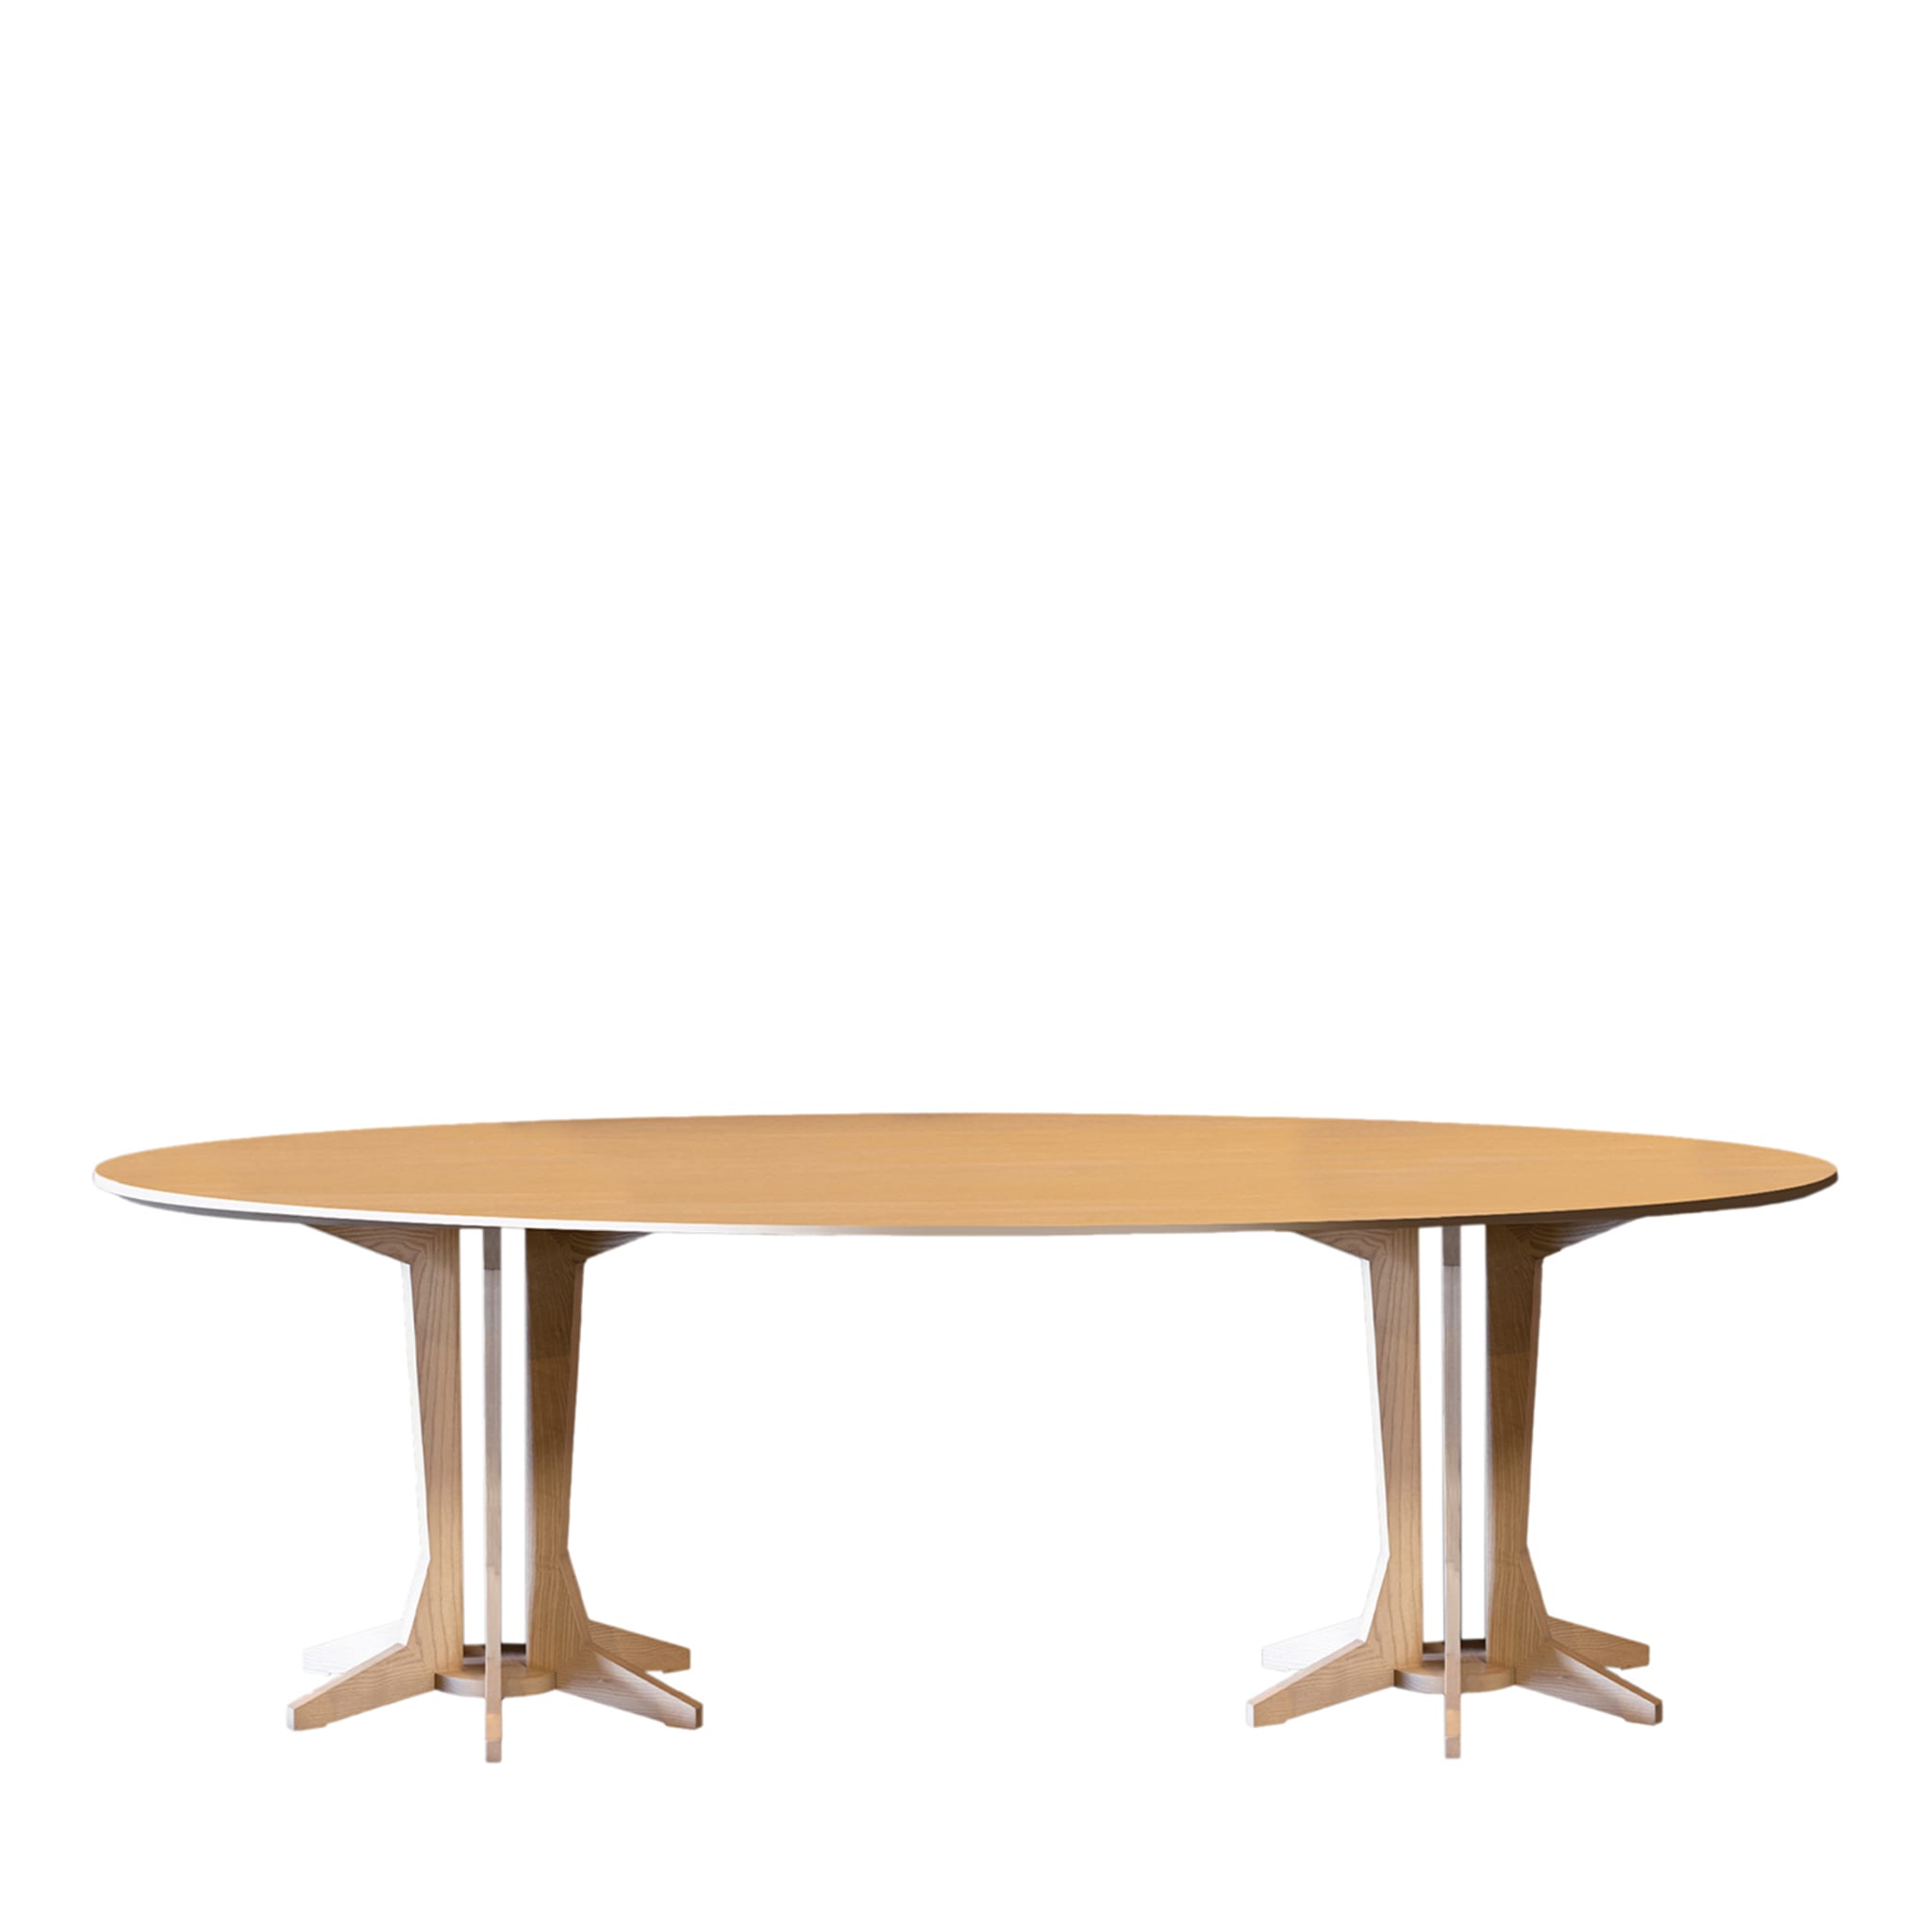 BADANO 1954 oval dining table by Franco Albini - Main view